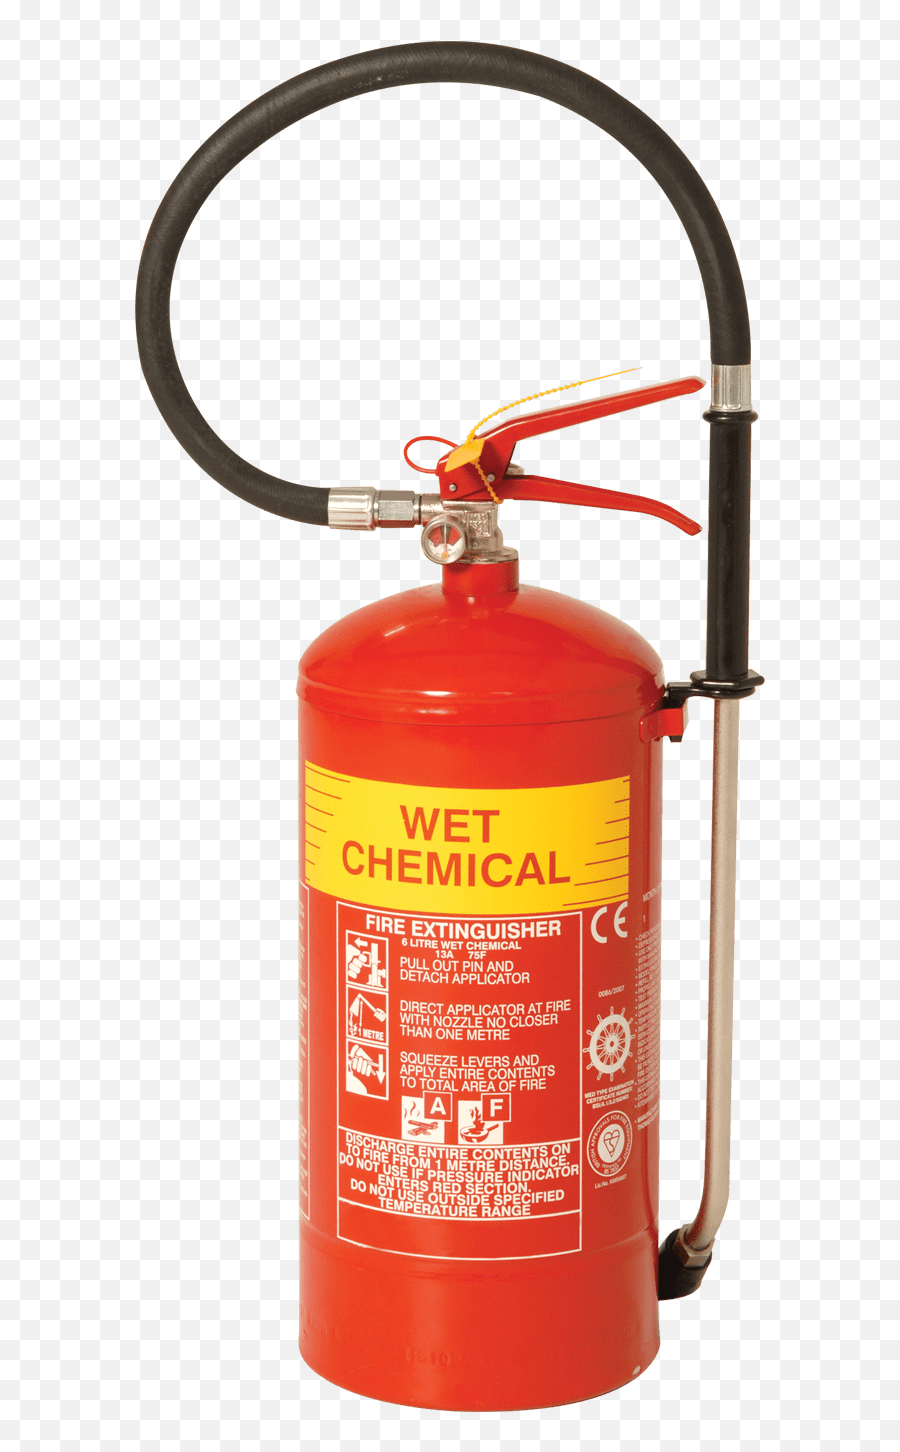 Wet Chemical Extinguisher Protec Fire And Security Group Ltd Png Icon